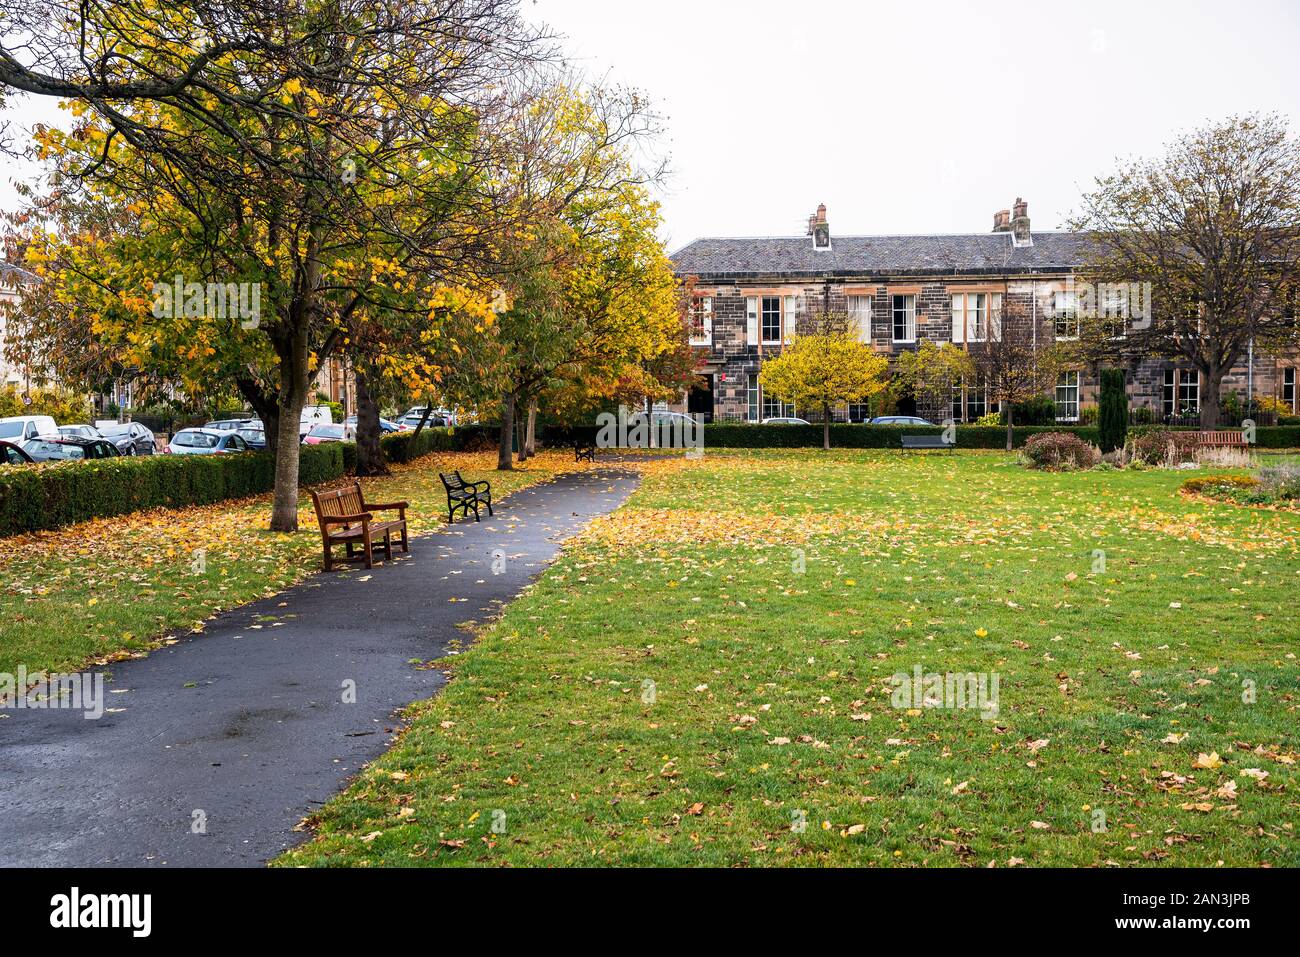 Public park with a paved path lined with wooden benches surrounded by tradtional stone terraced houses on a cloudy autumn day Stock Photo